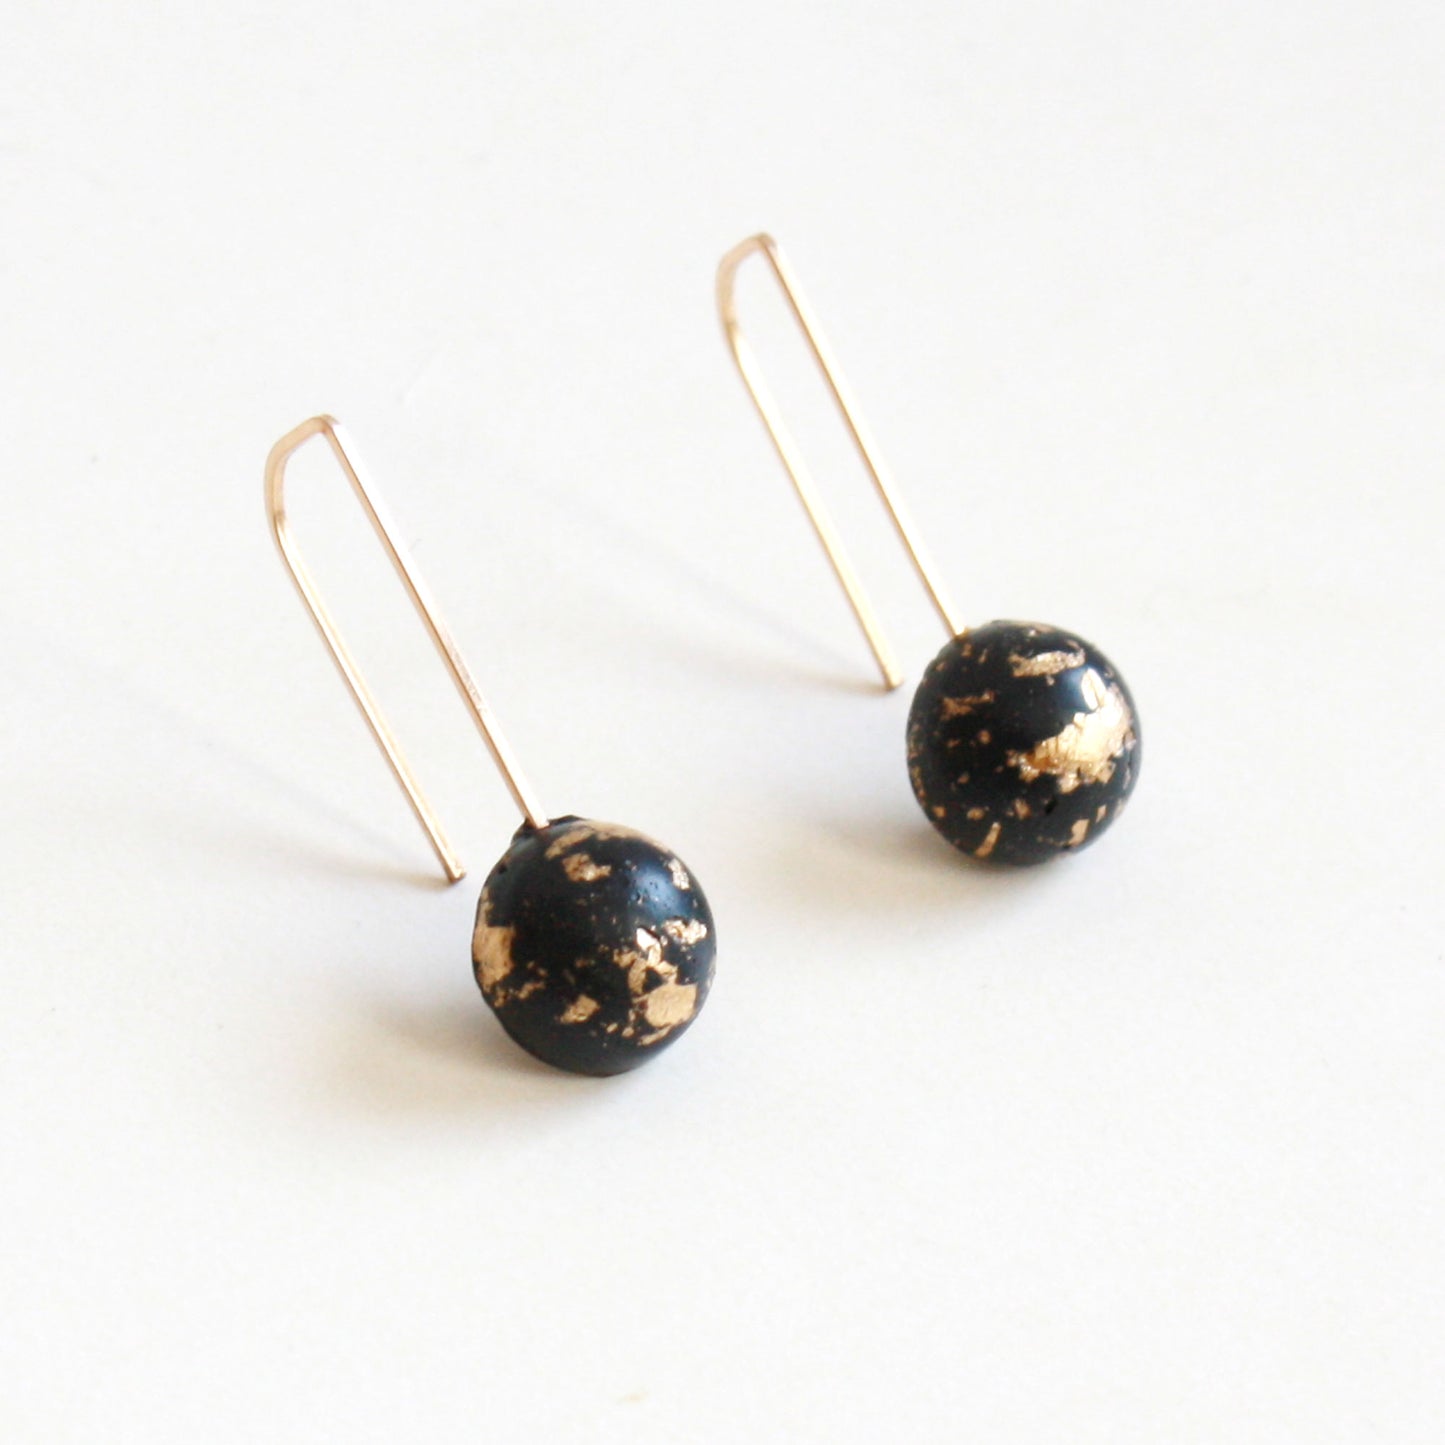 Small Black Dome Earrings with Gold Flakes – Hooks and Luxe